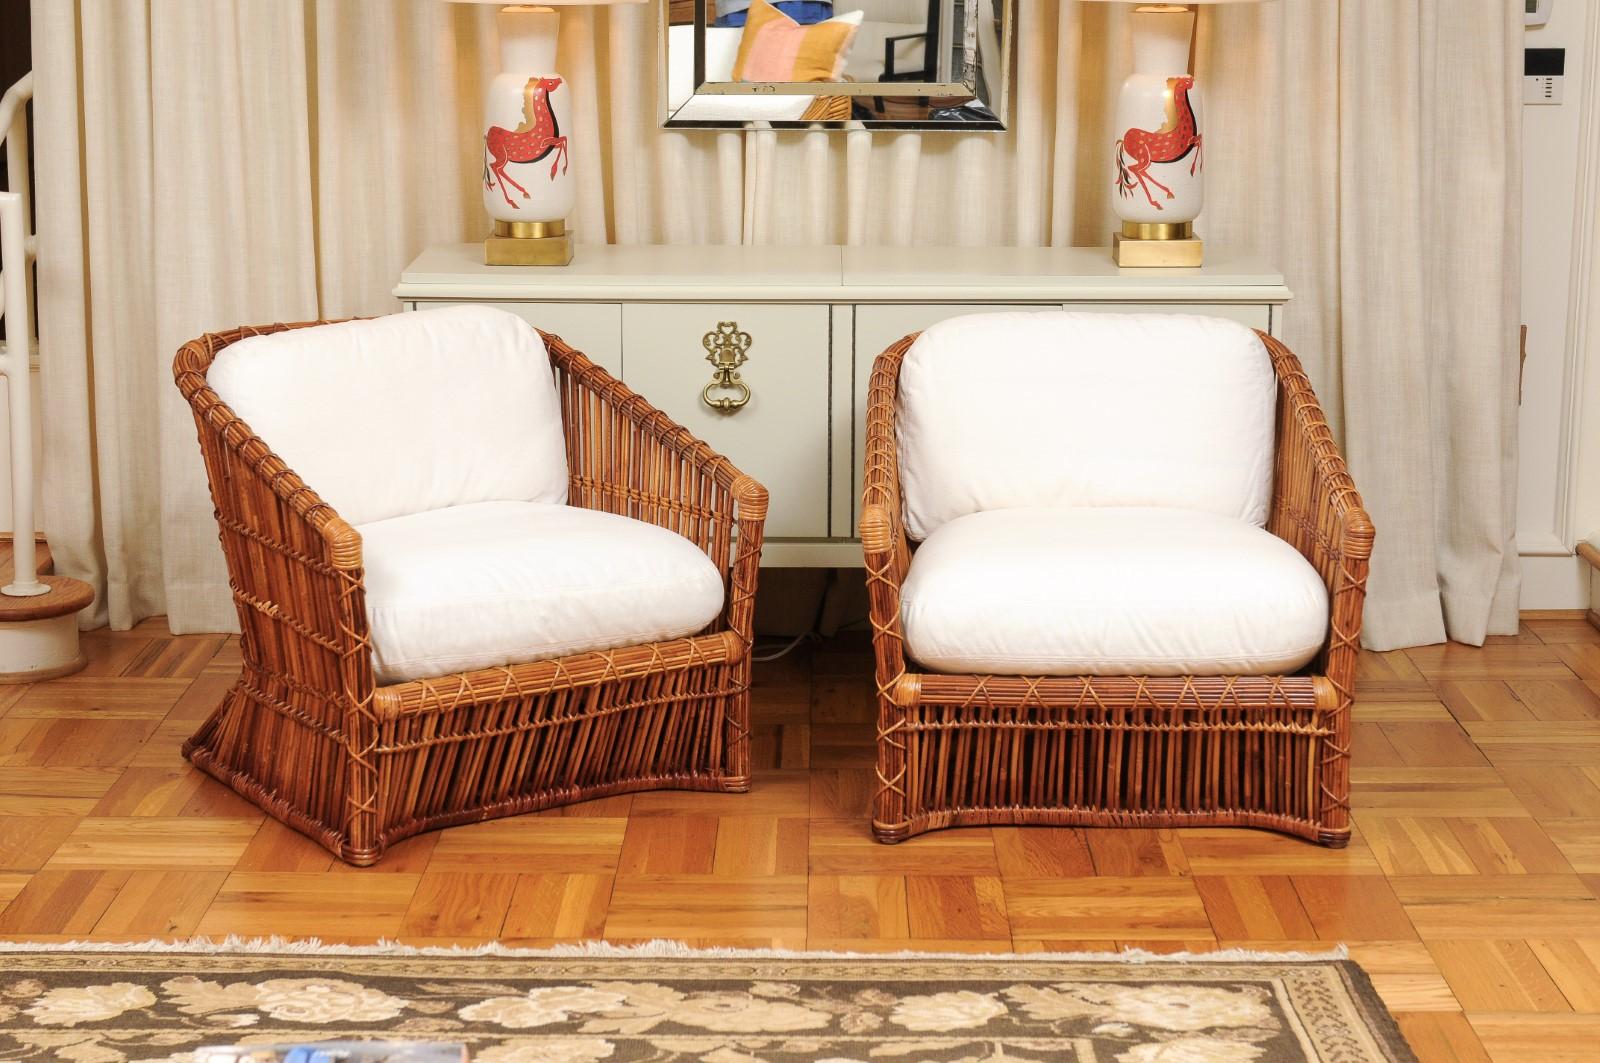 These magnificent lounge chairs are shipped as professionally photographed and described in the listing narrative: Meticulously professionally restored and expertly upholstered. Installation Ready. Expert custom upholstery service is